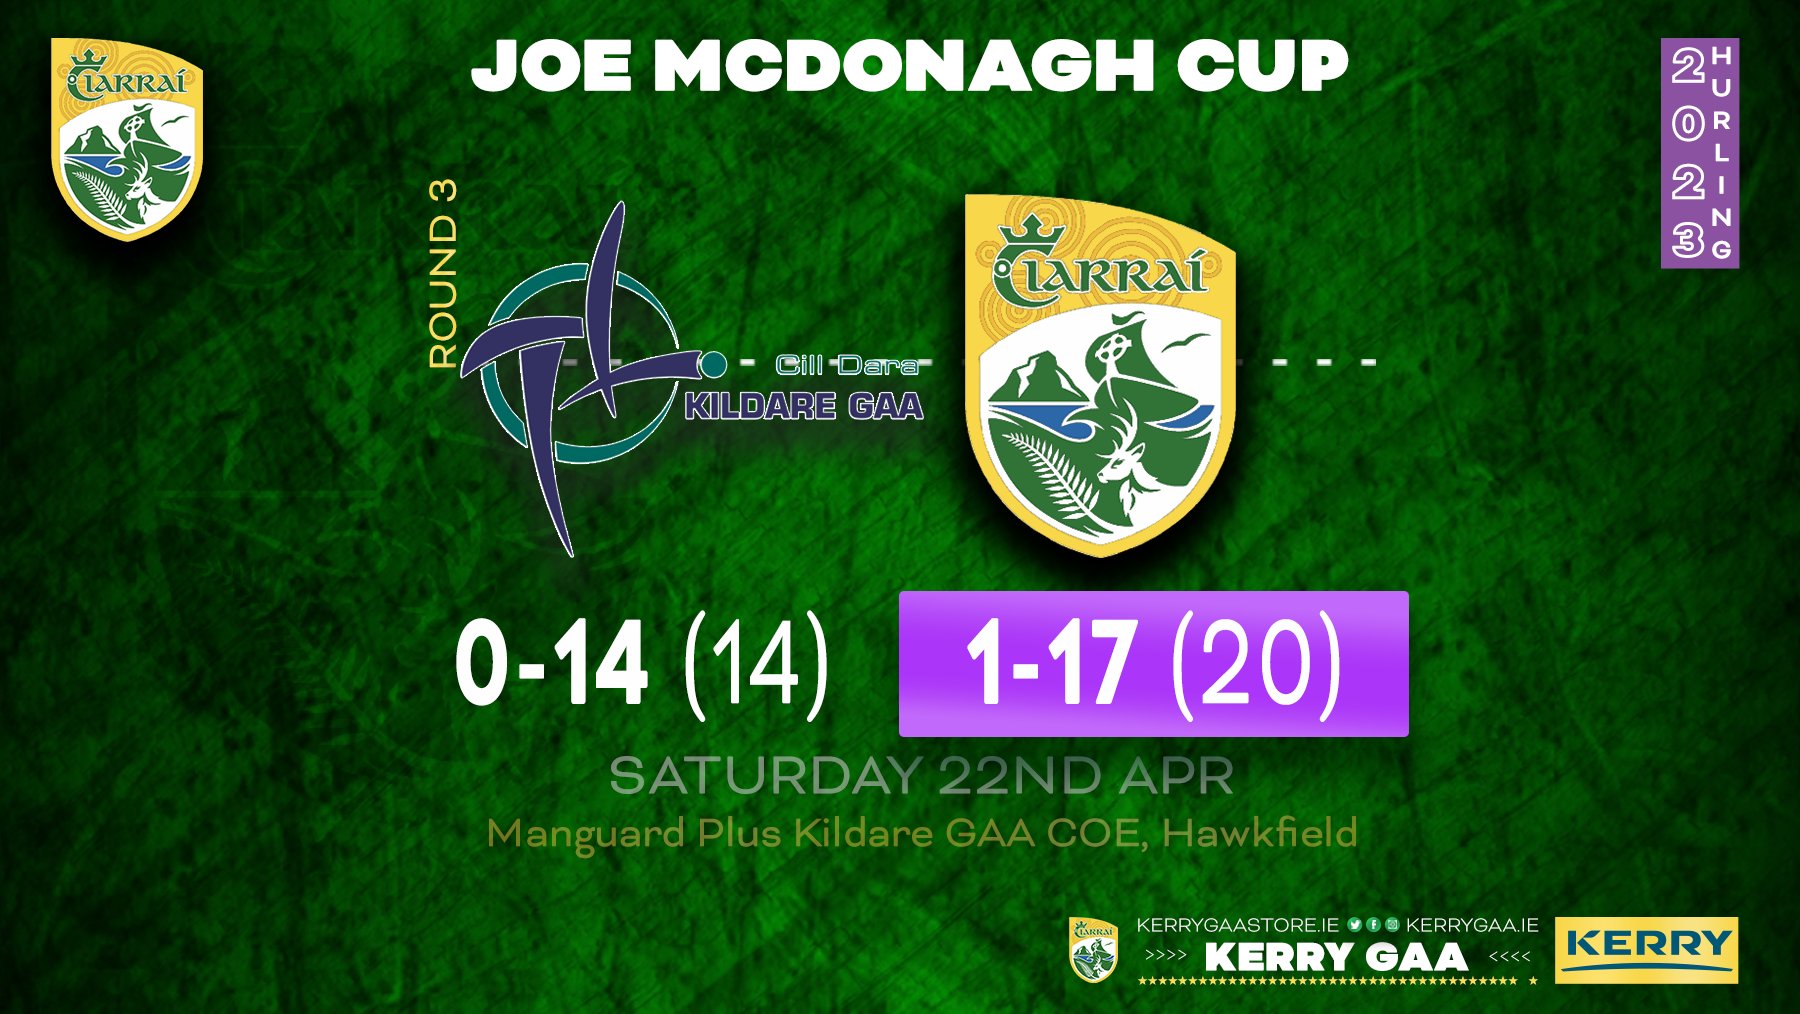 A win for Kerry in the Joe McDonagh Cup